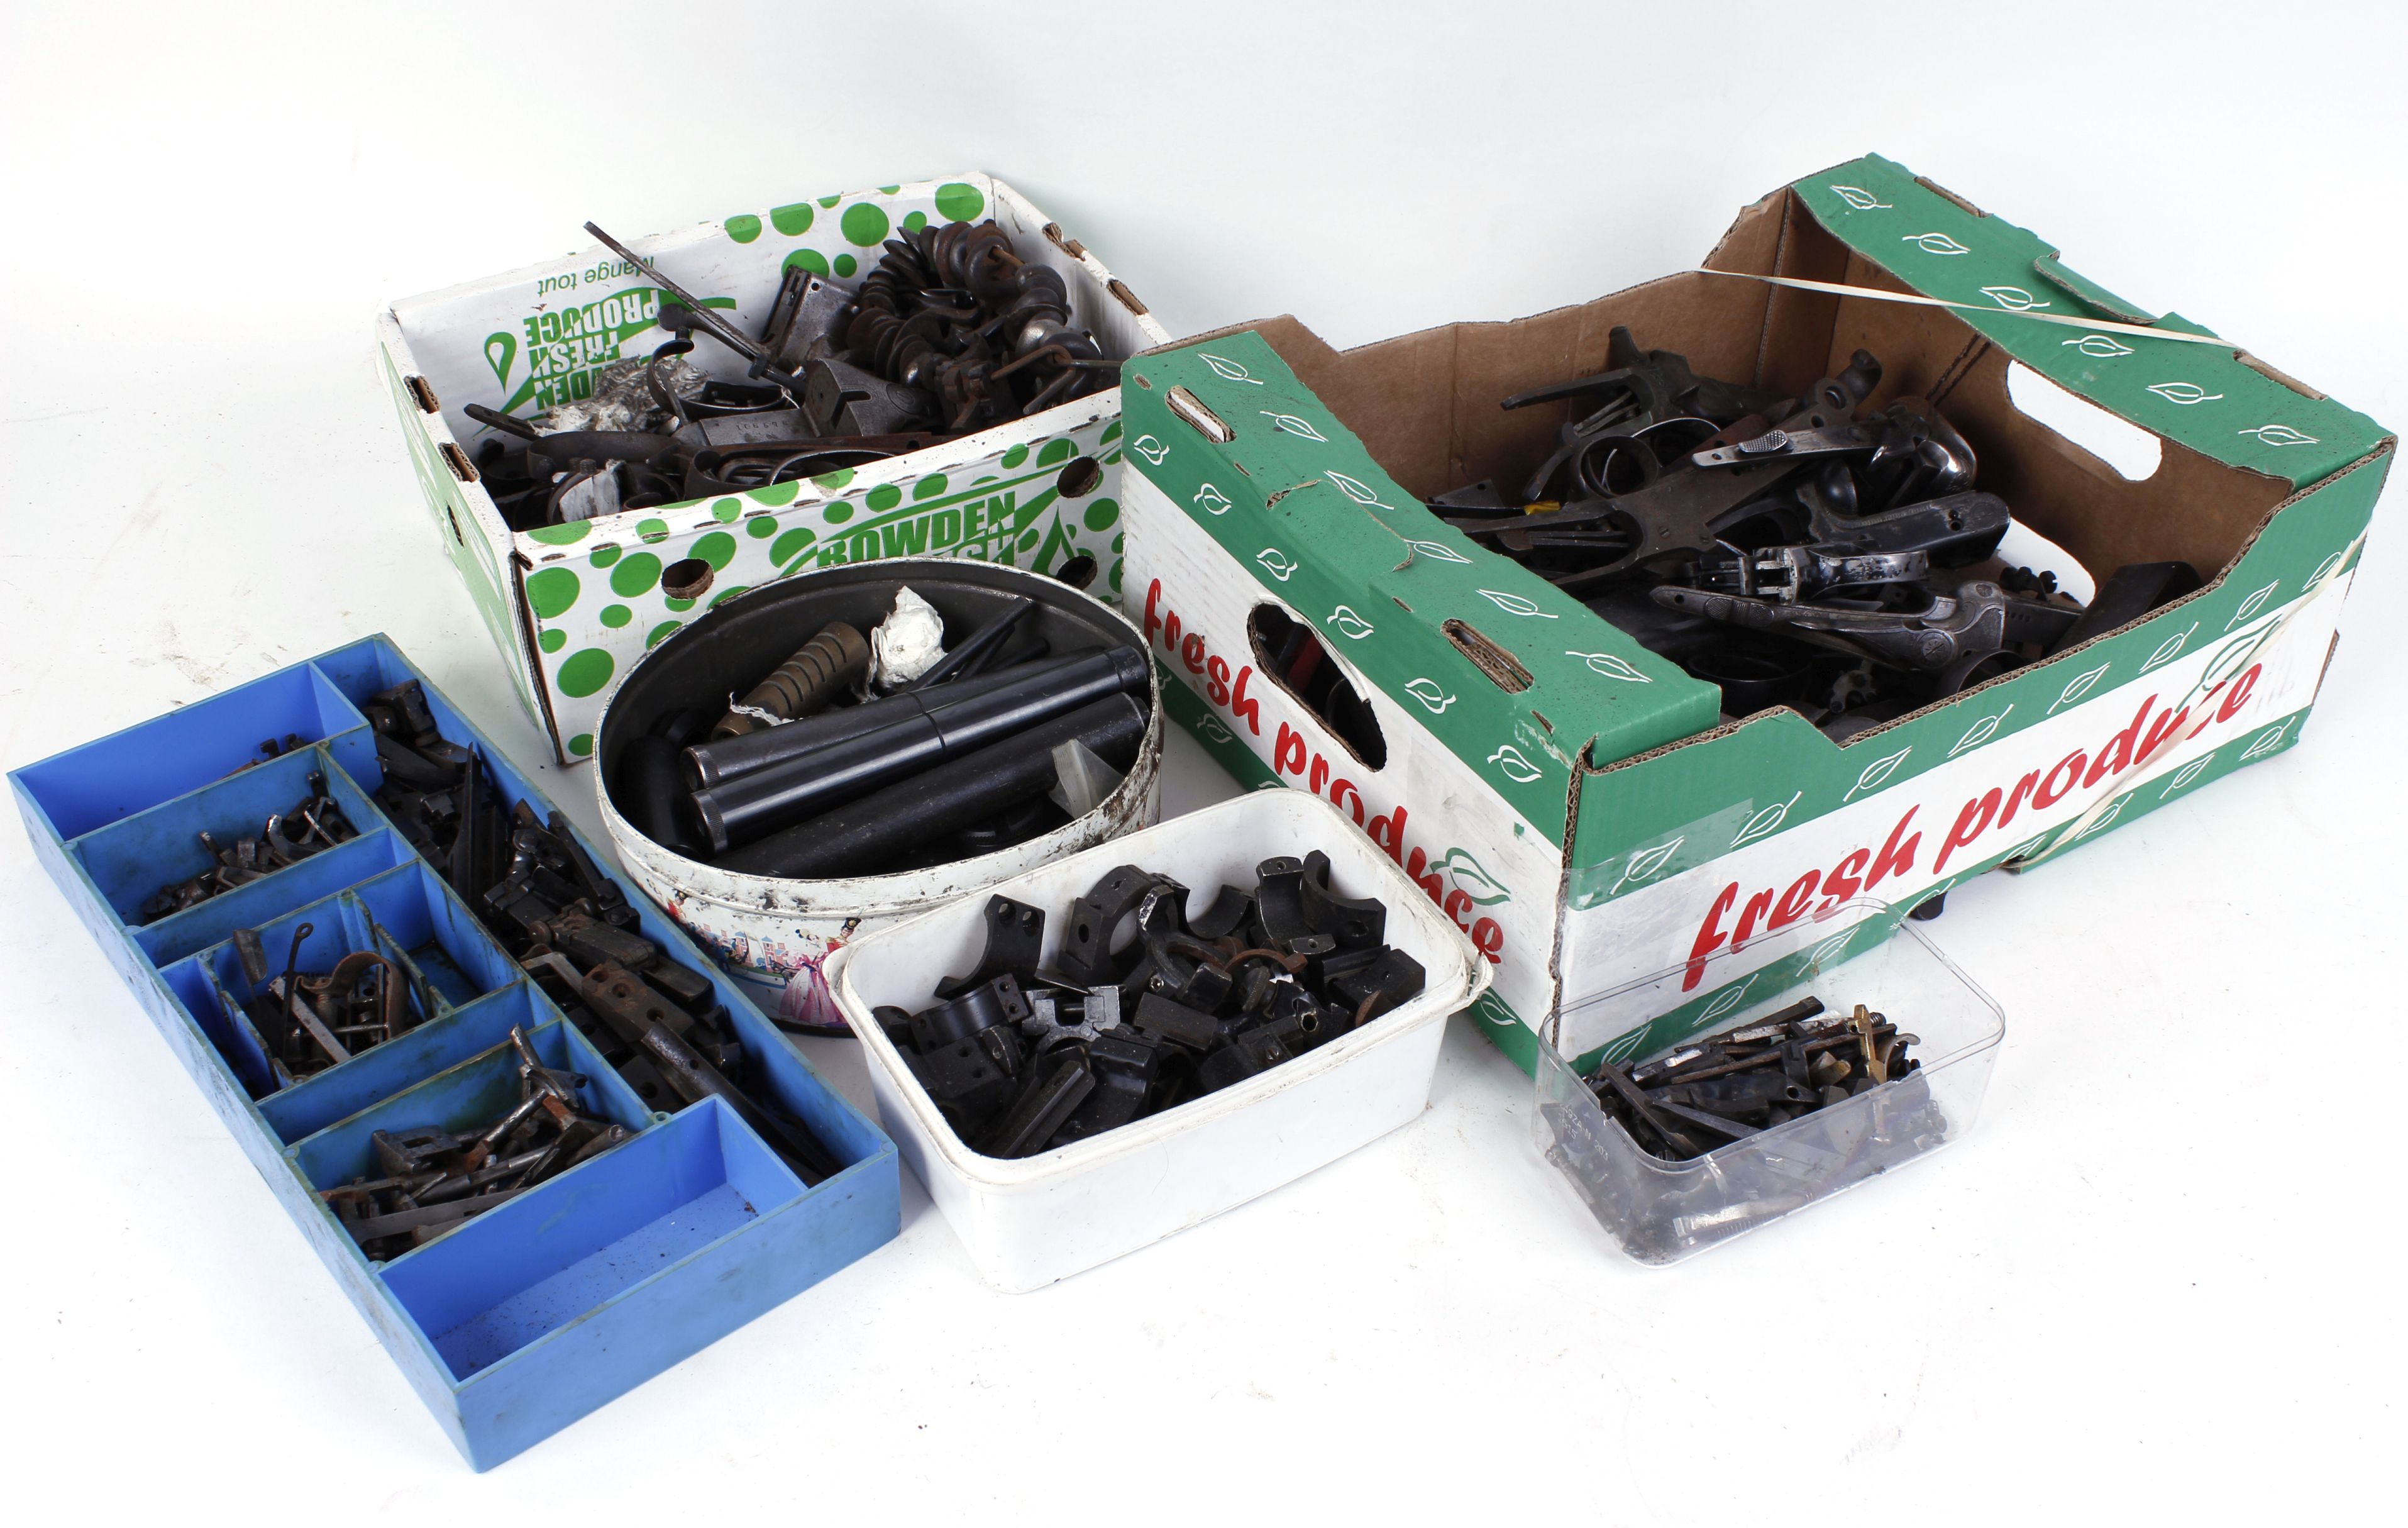 Large quantity of various gun action parts, trigger guards, hammers, mounts and other parts and